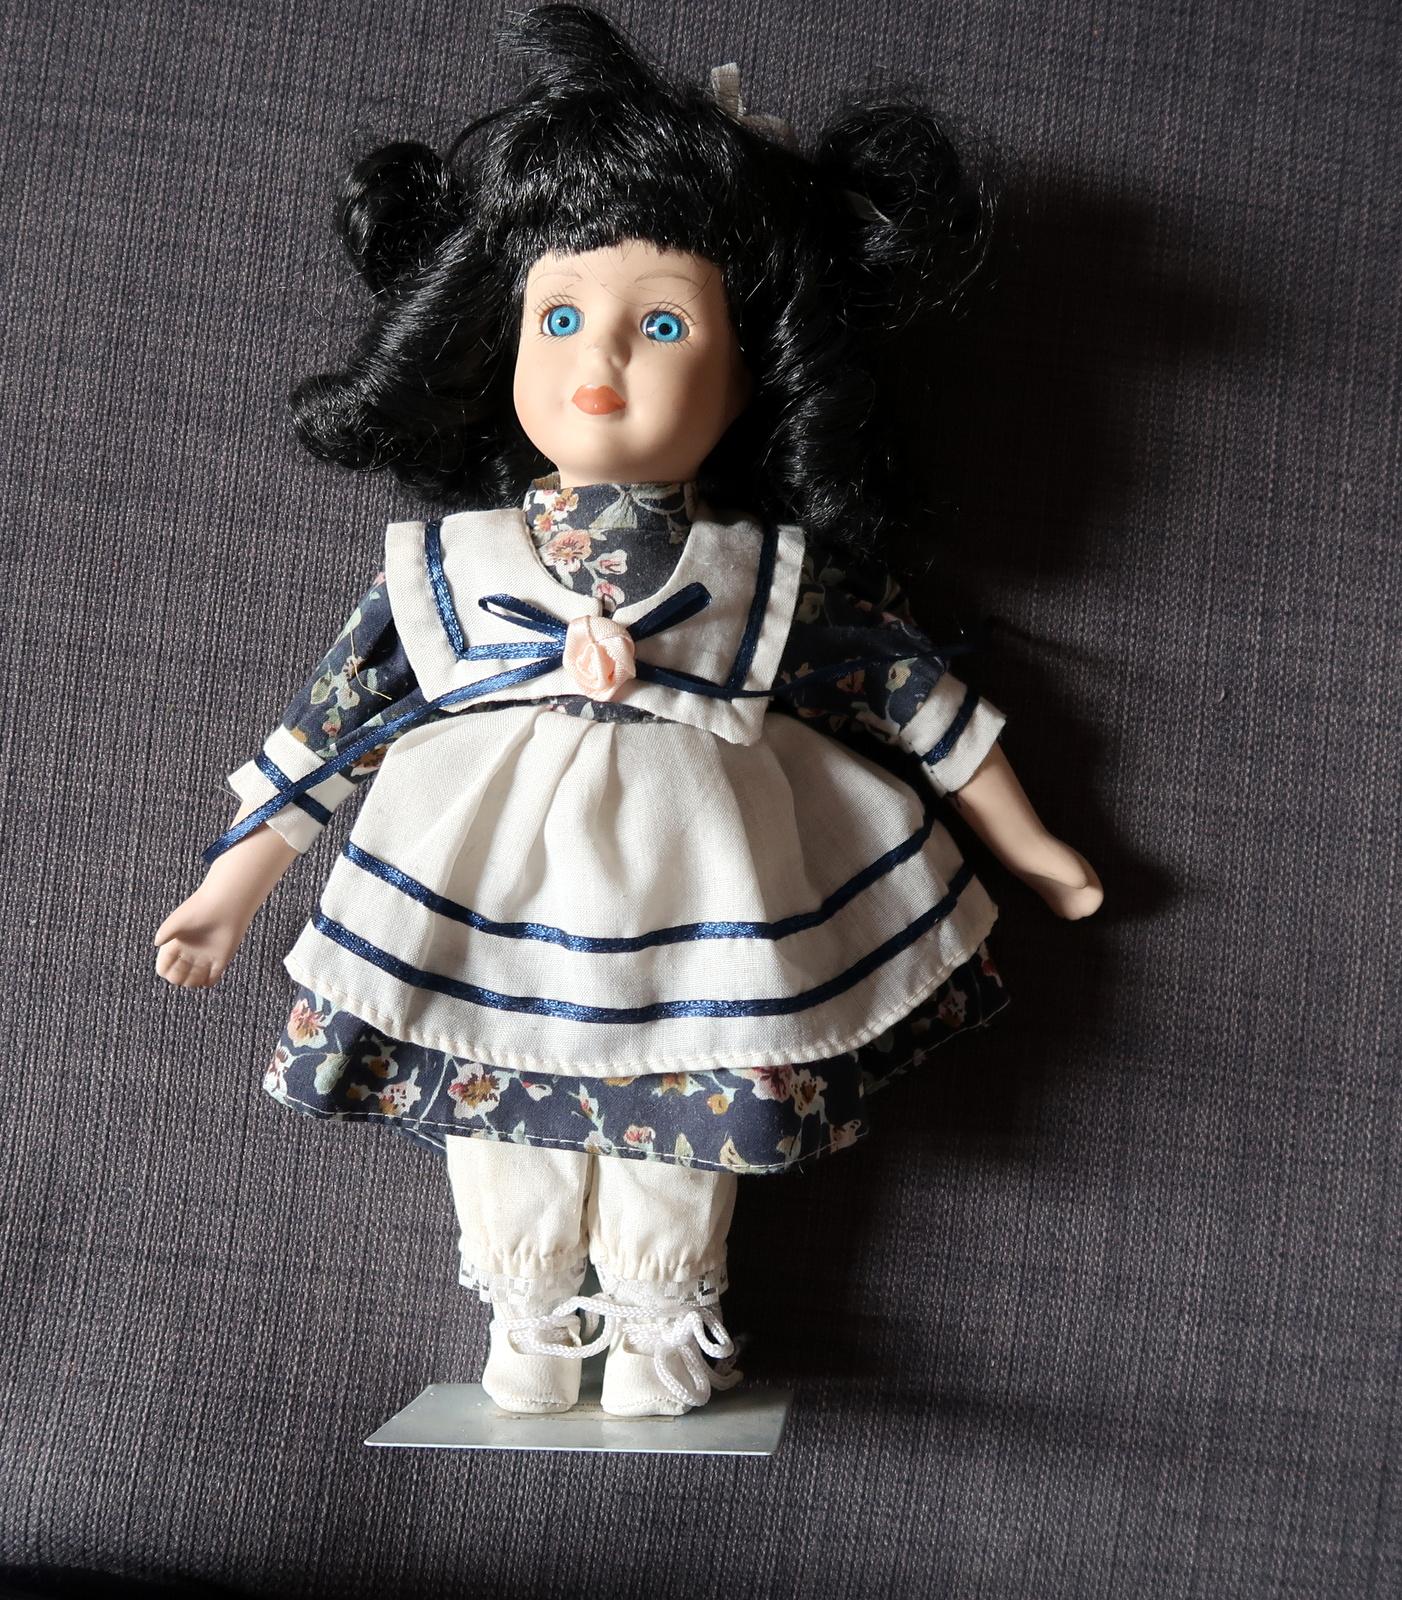 20th Century Elegant Vintage Porcelain Doll, Blue and White Beauty from the 20th century 2C05 For Sale